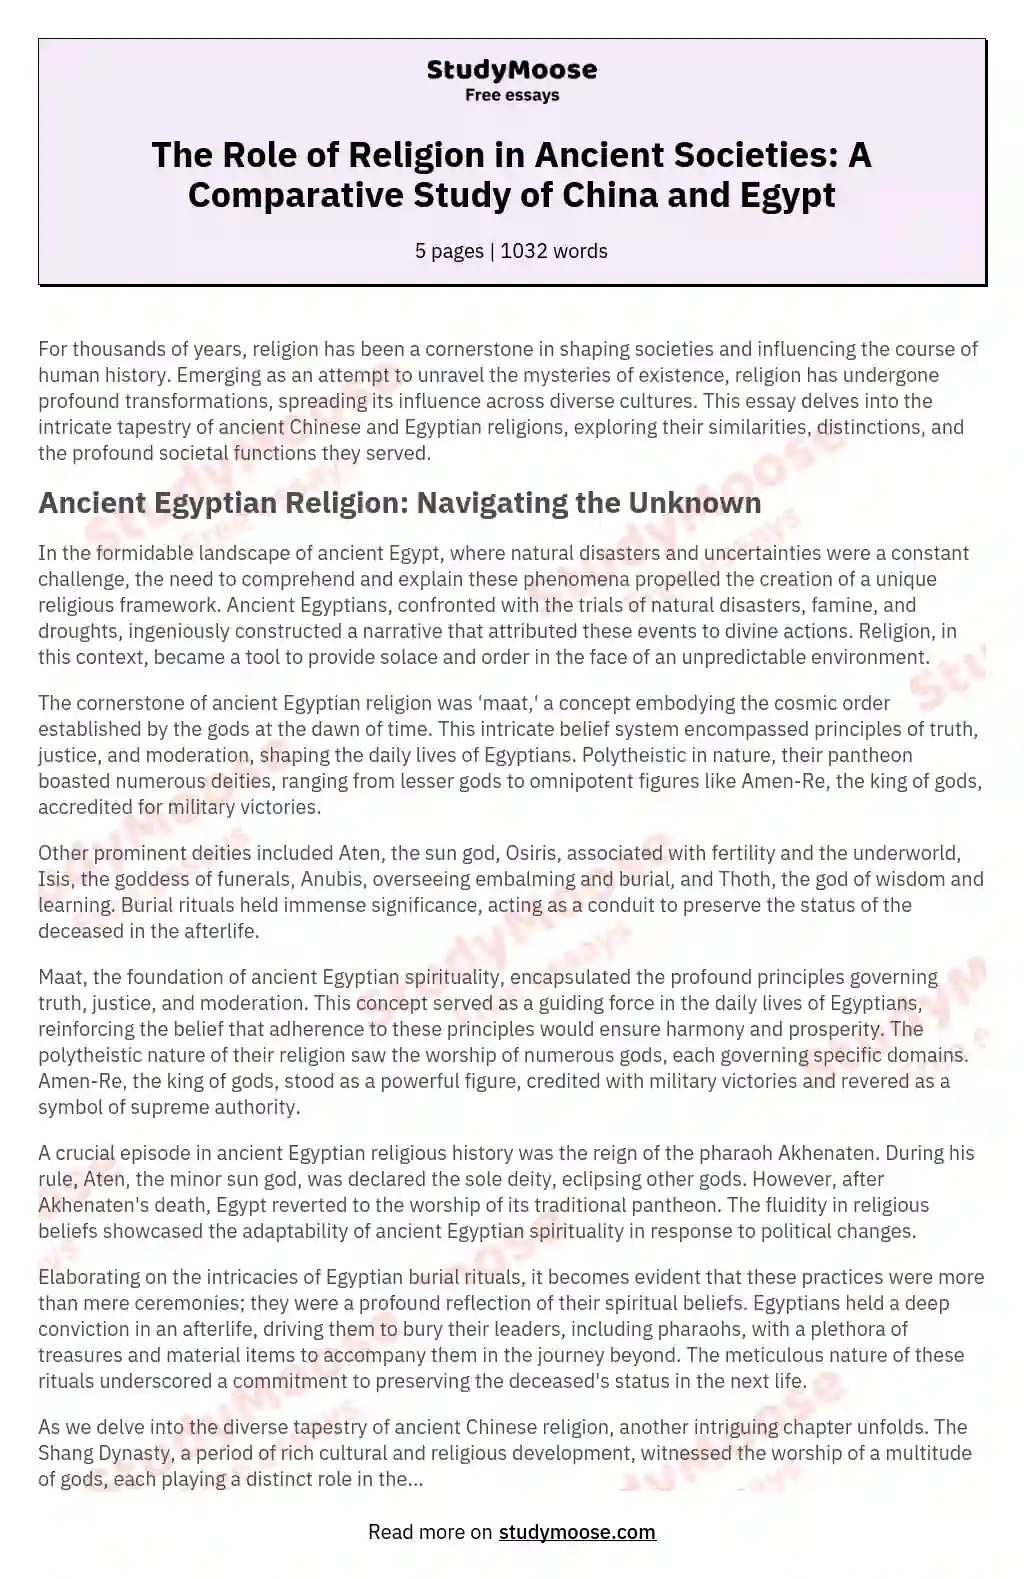 The Role of Religion in Ancient Societies: A Comparative Study of China and Egypt essay